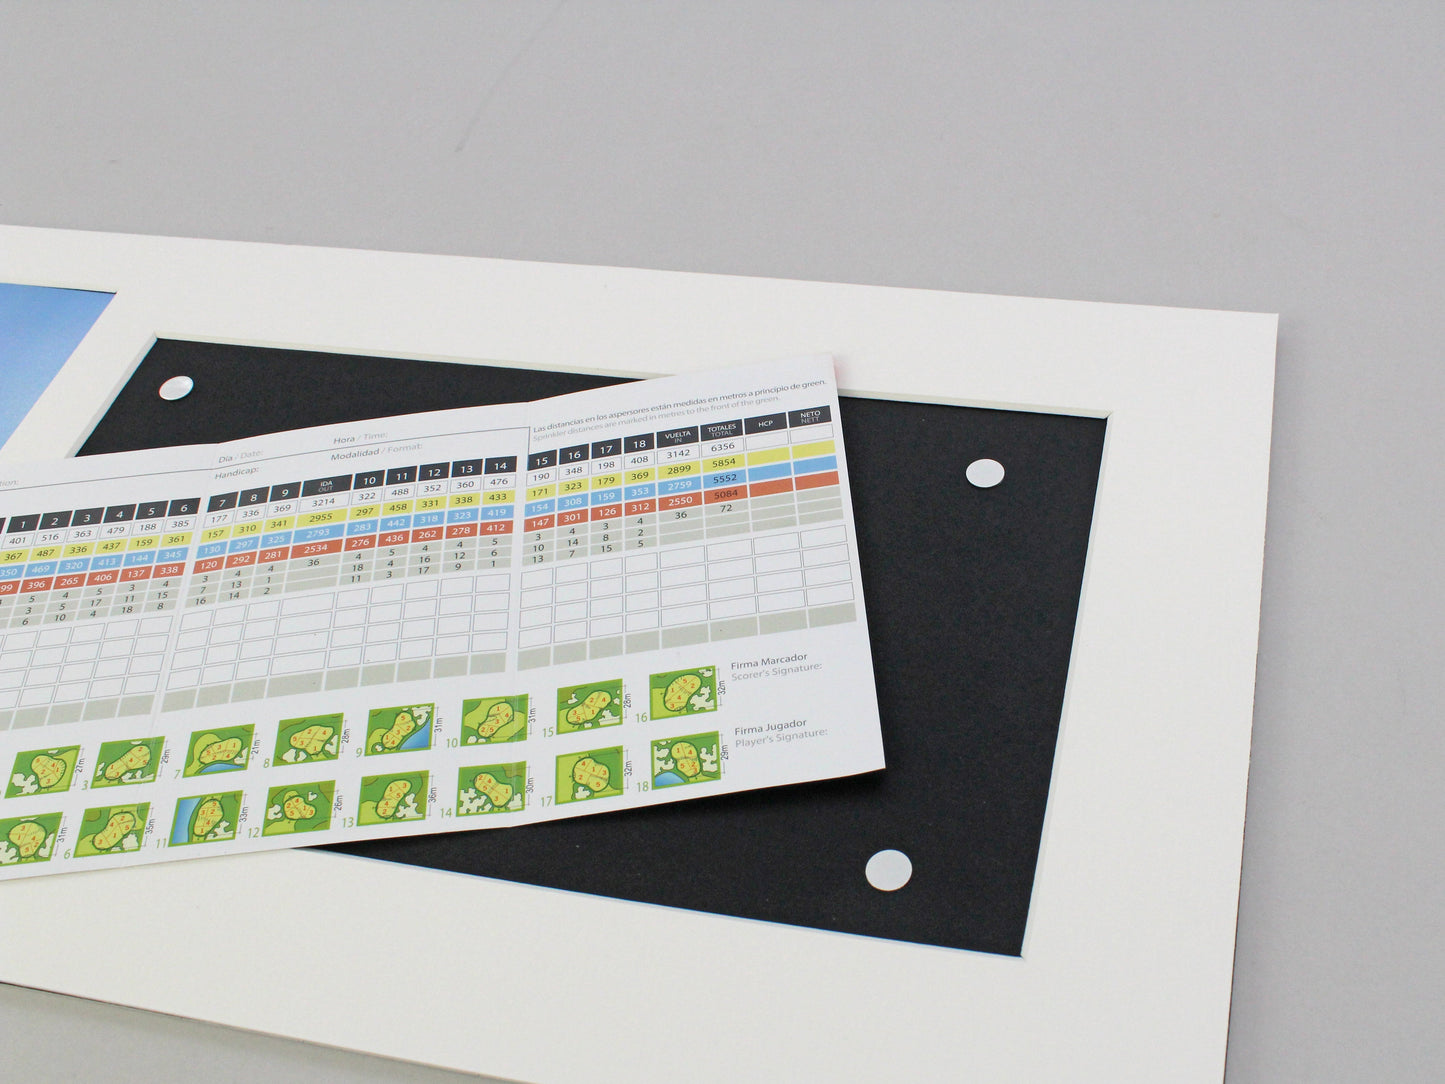 Personalised Golf Score Card Display Frame. 20x40cm Frame | Score Card sizes can vary - Check your size before purchase. - PhotoFramesandMore - Wooden Picture Frames